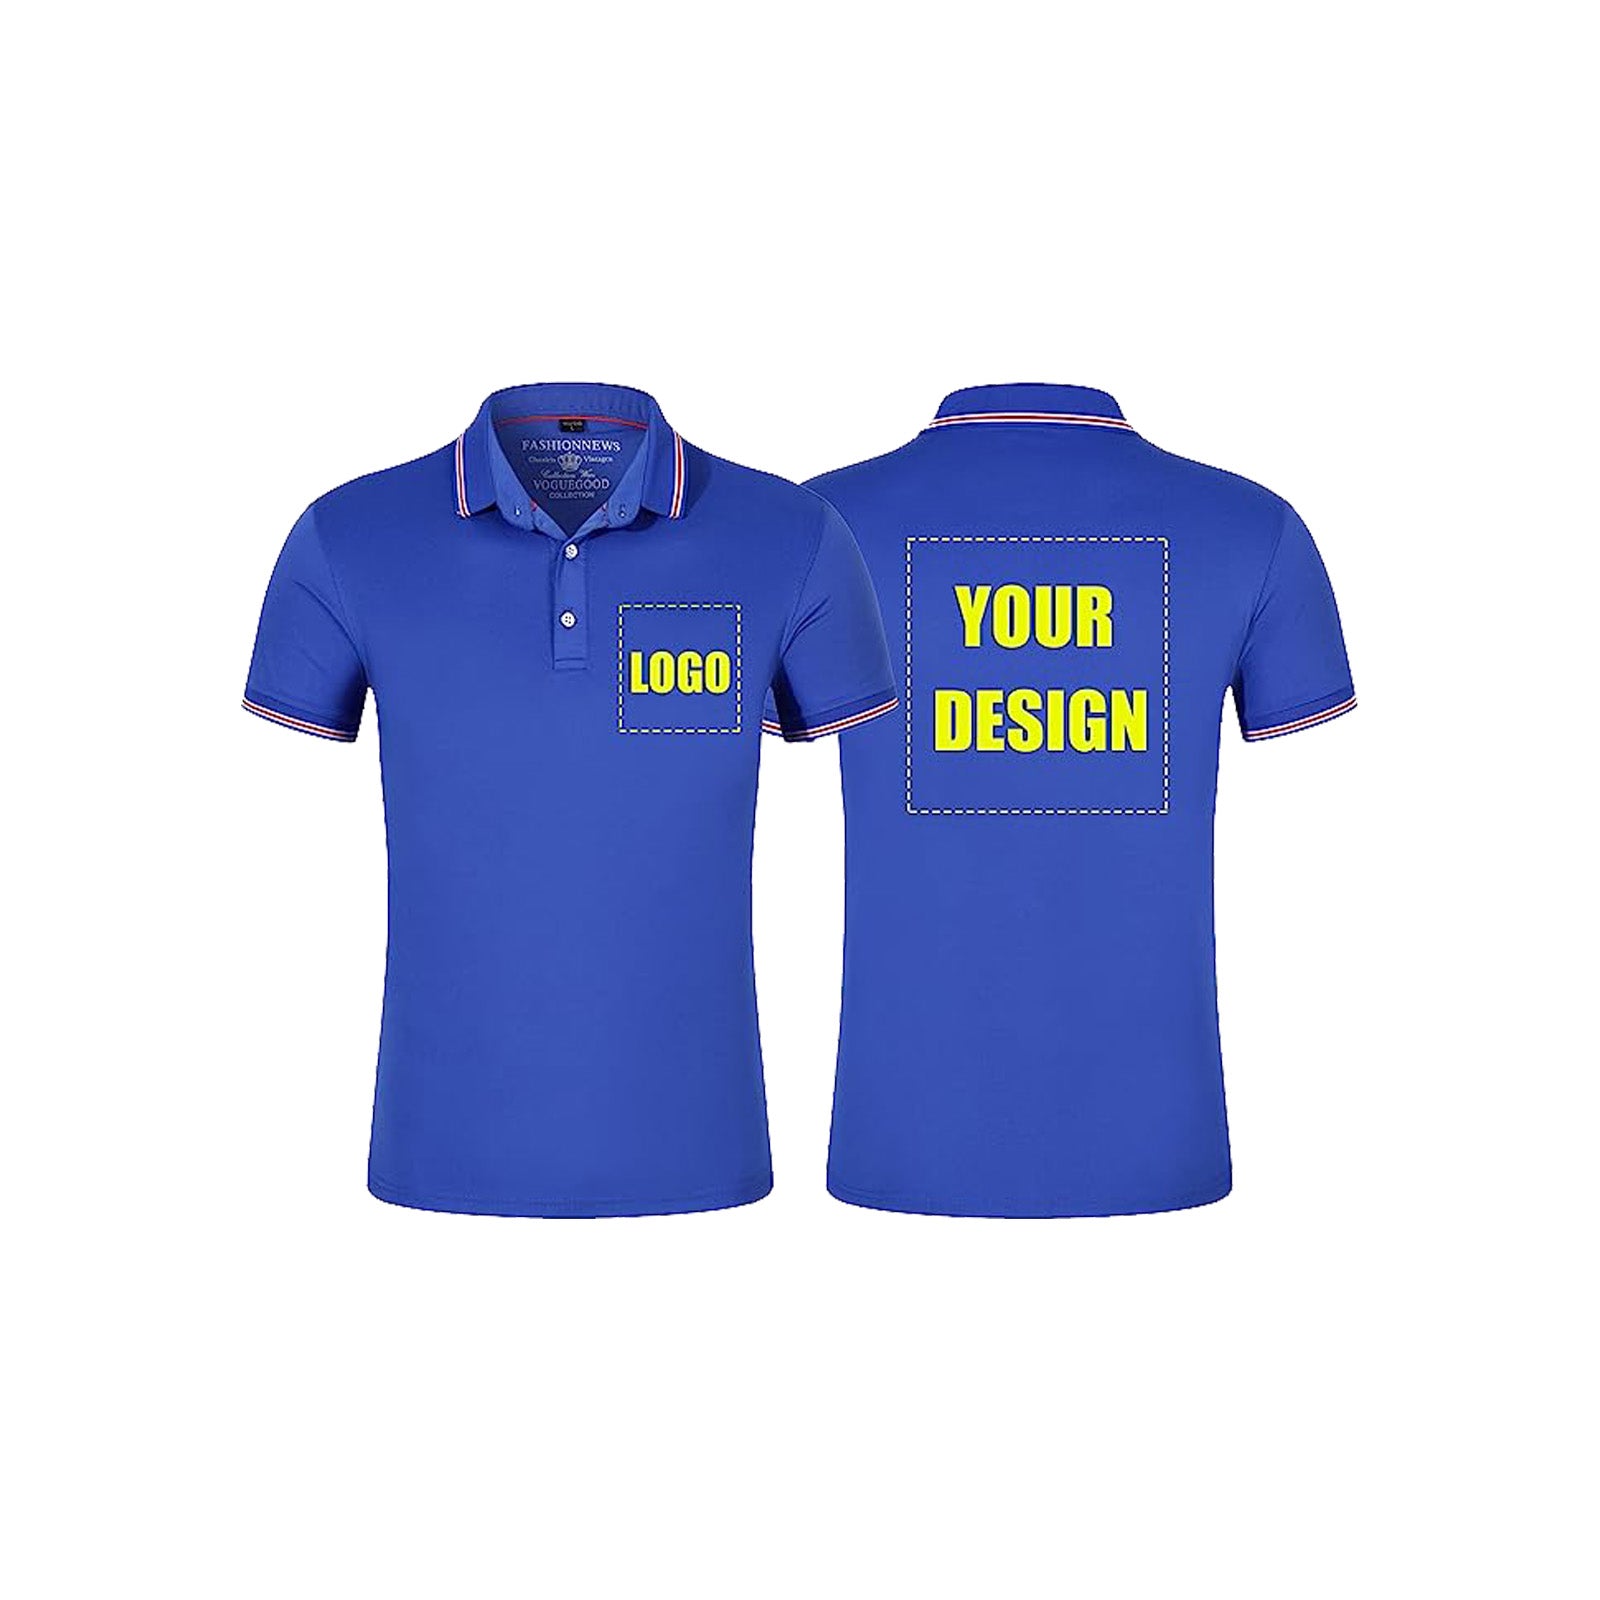 custom white polo shirts with company logo text your design from 1PC size S M L XL 2XL